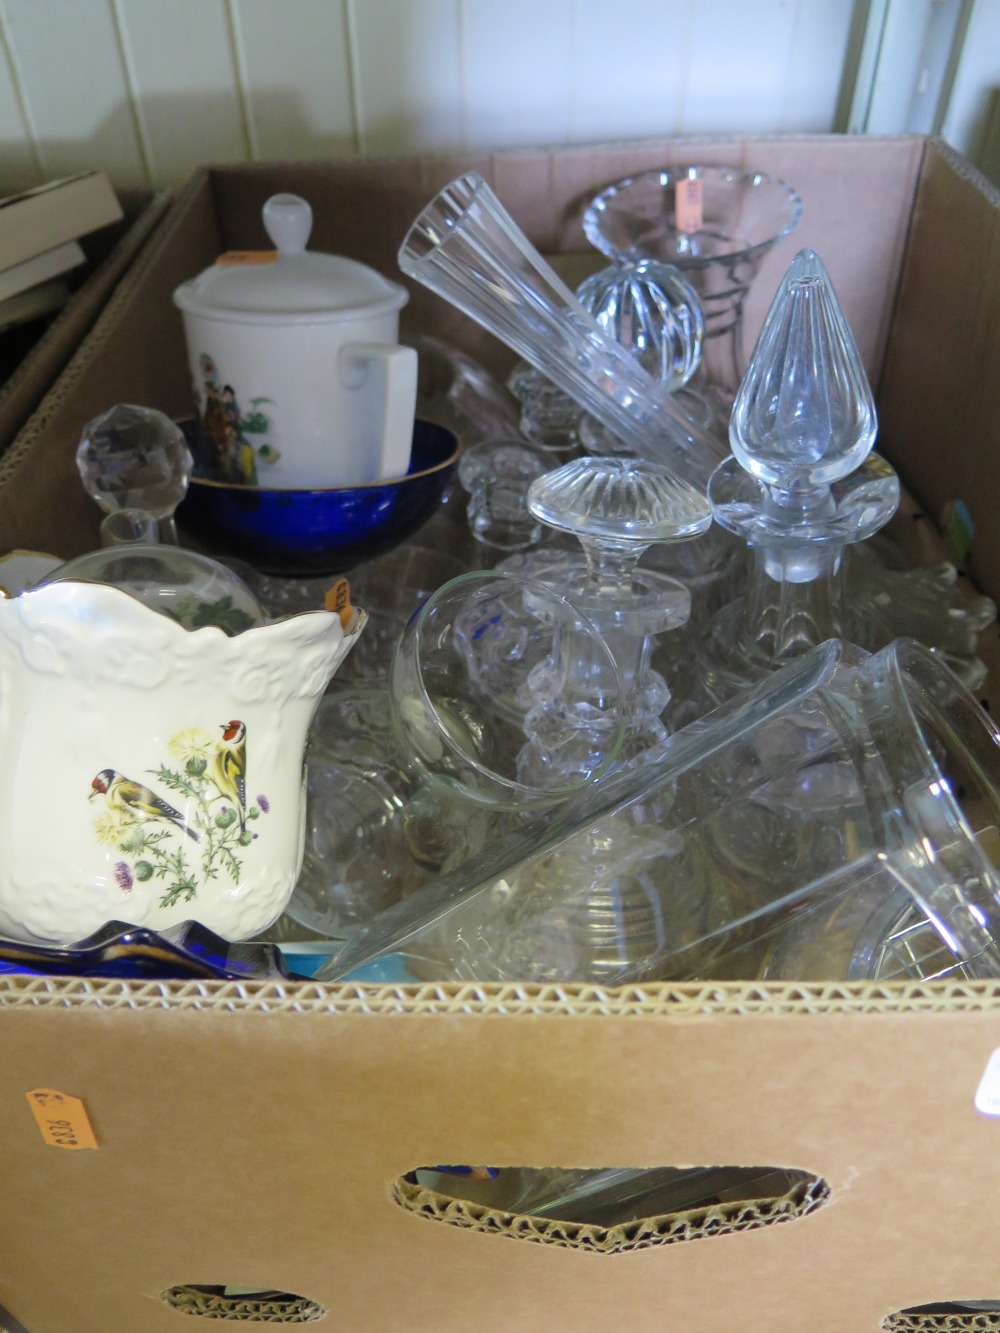 A Large Selection of Glassware including decanters and vases and odd ceramics